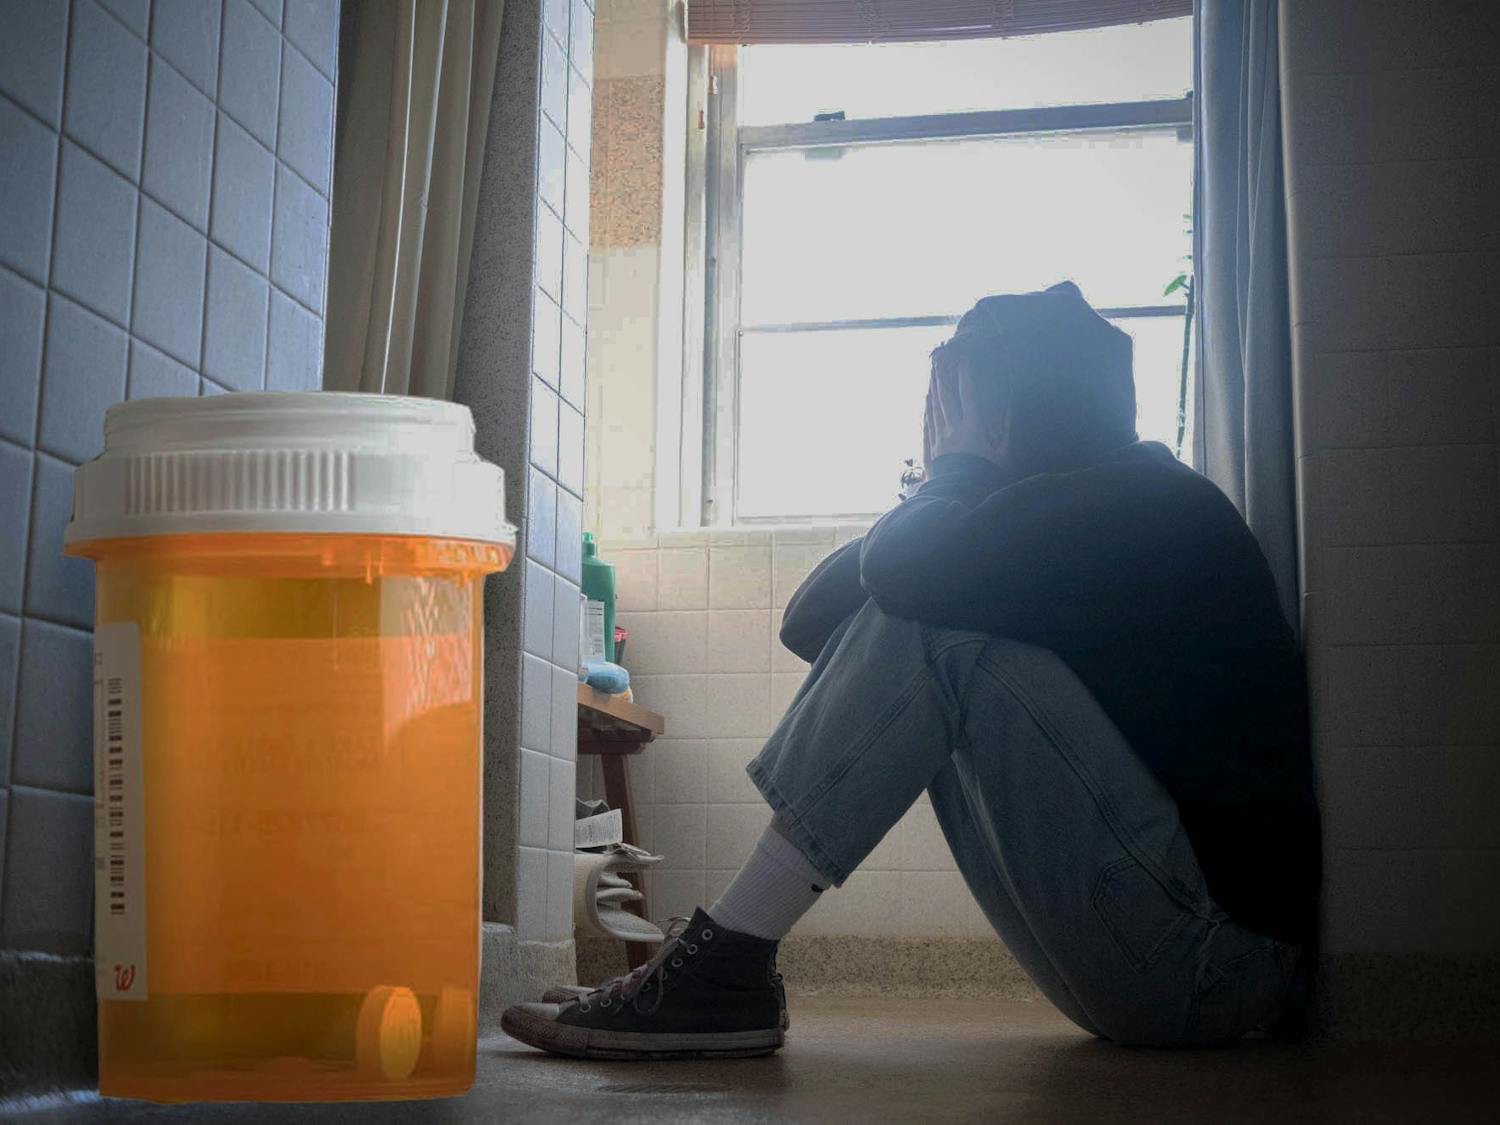 DTH Photo Illustration. Opioid abuse continues to be a pervasive problem in North Carolina. Since 2018, UNC has been working to mitigate the effects of the opioid epidemic and research safer pharmacological alternatives to treating pain.